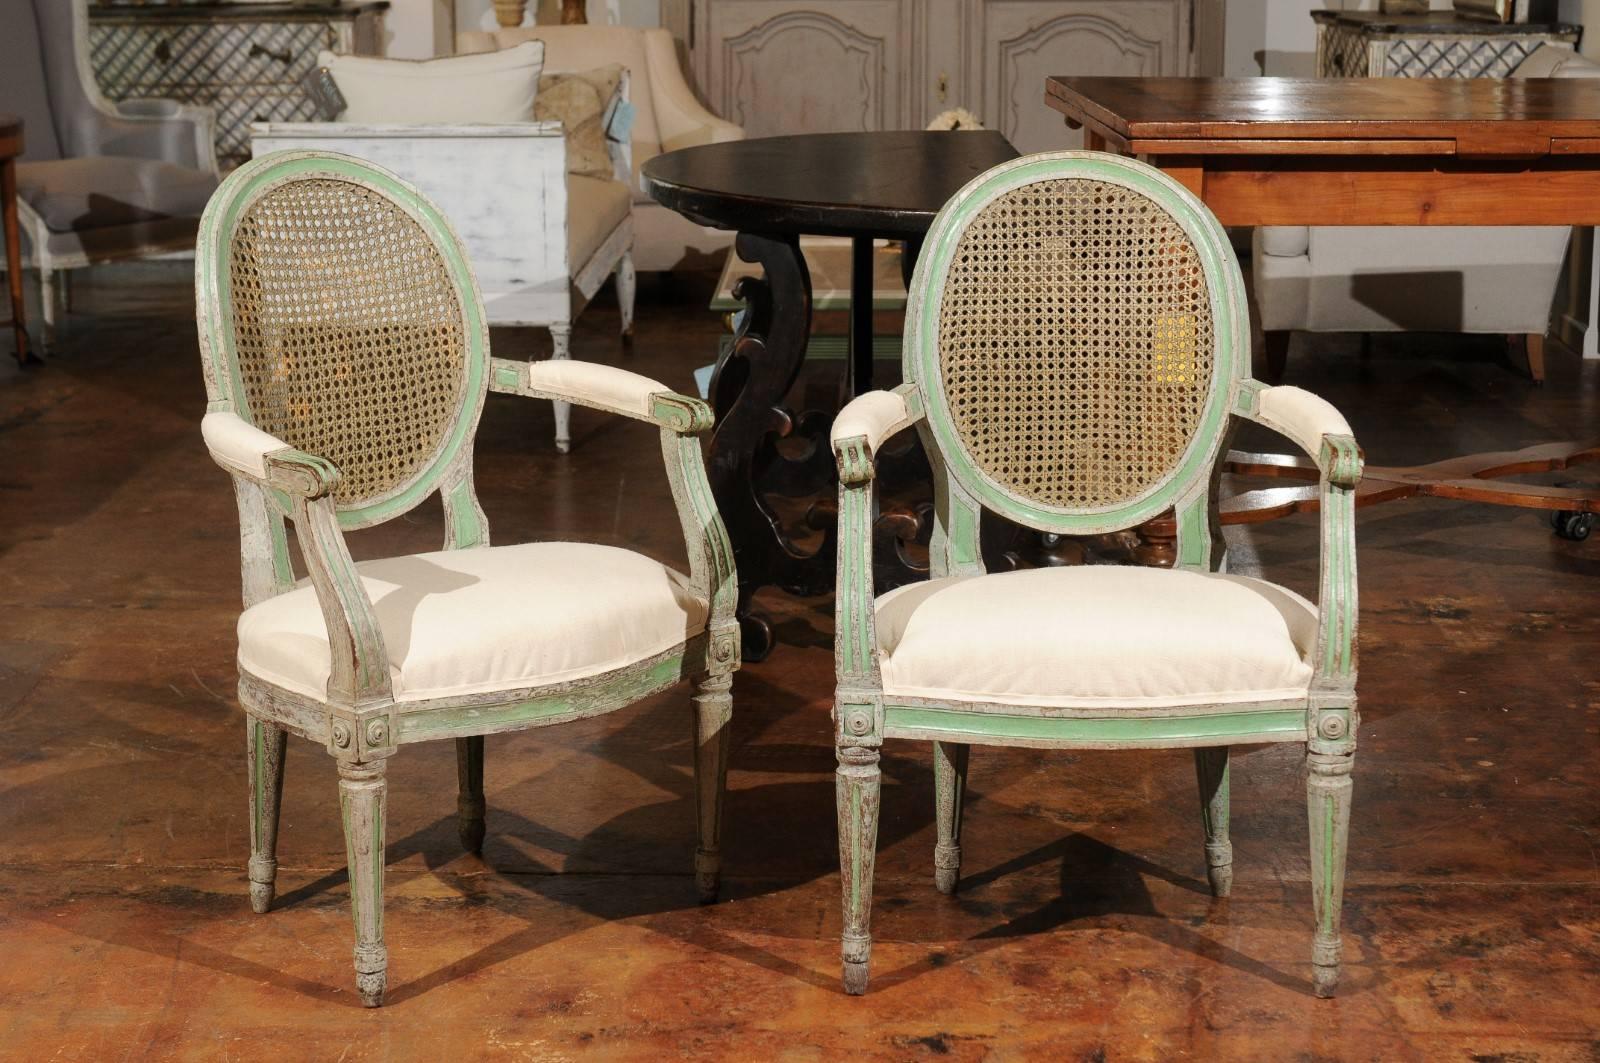 A pair of Italian neoclassical style green painted wooden armchairs from the mid-19th century, with cane oval backs and new upholstery. Each of this pair of Italian armchairs features a slightly slanted cane oval back, flanked with two partially